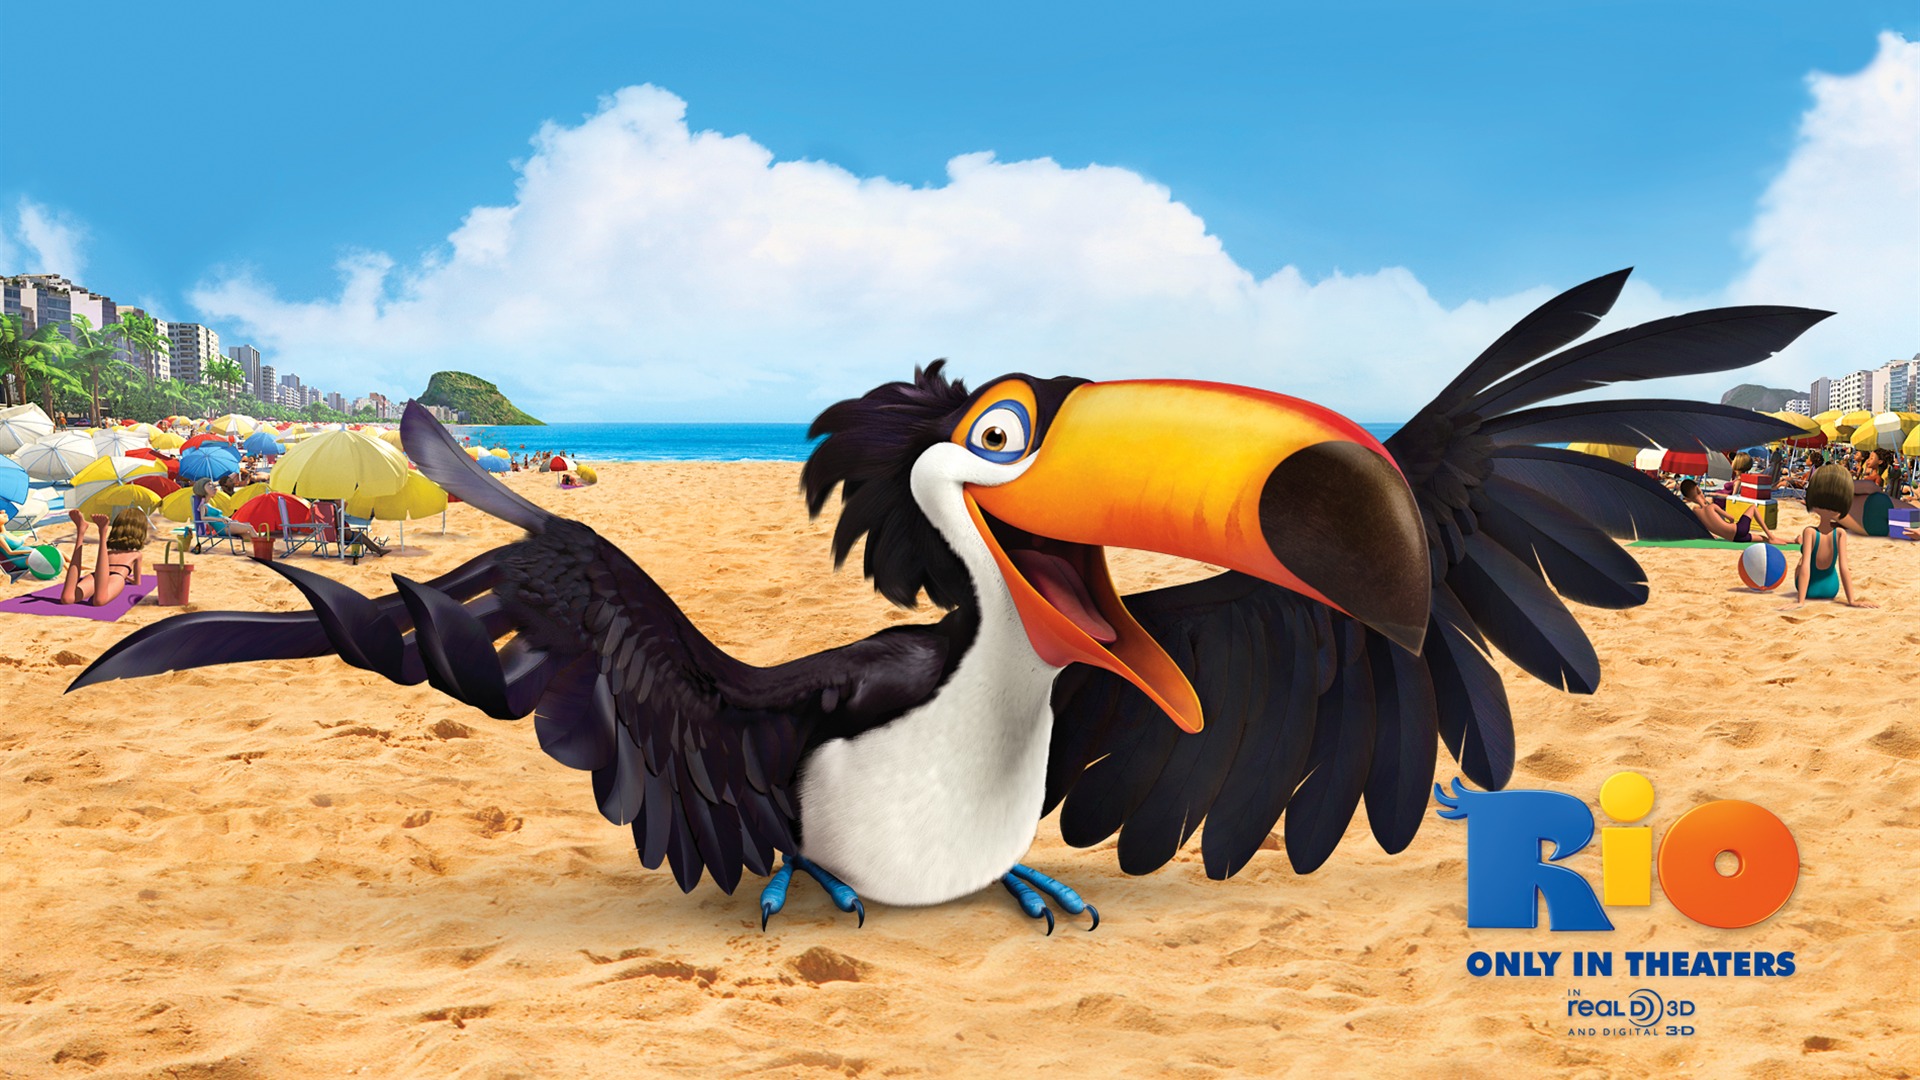 Rio 2011 wallpapers #17 - 1920x1080